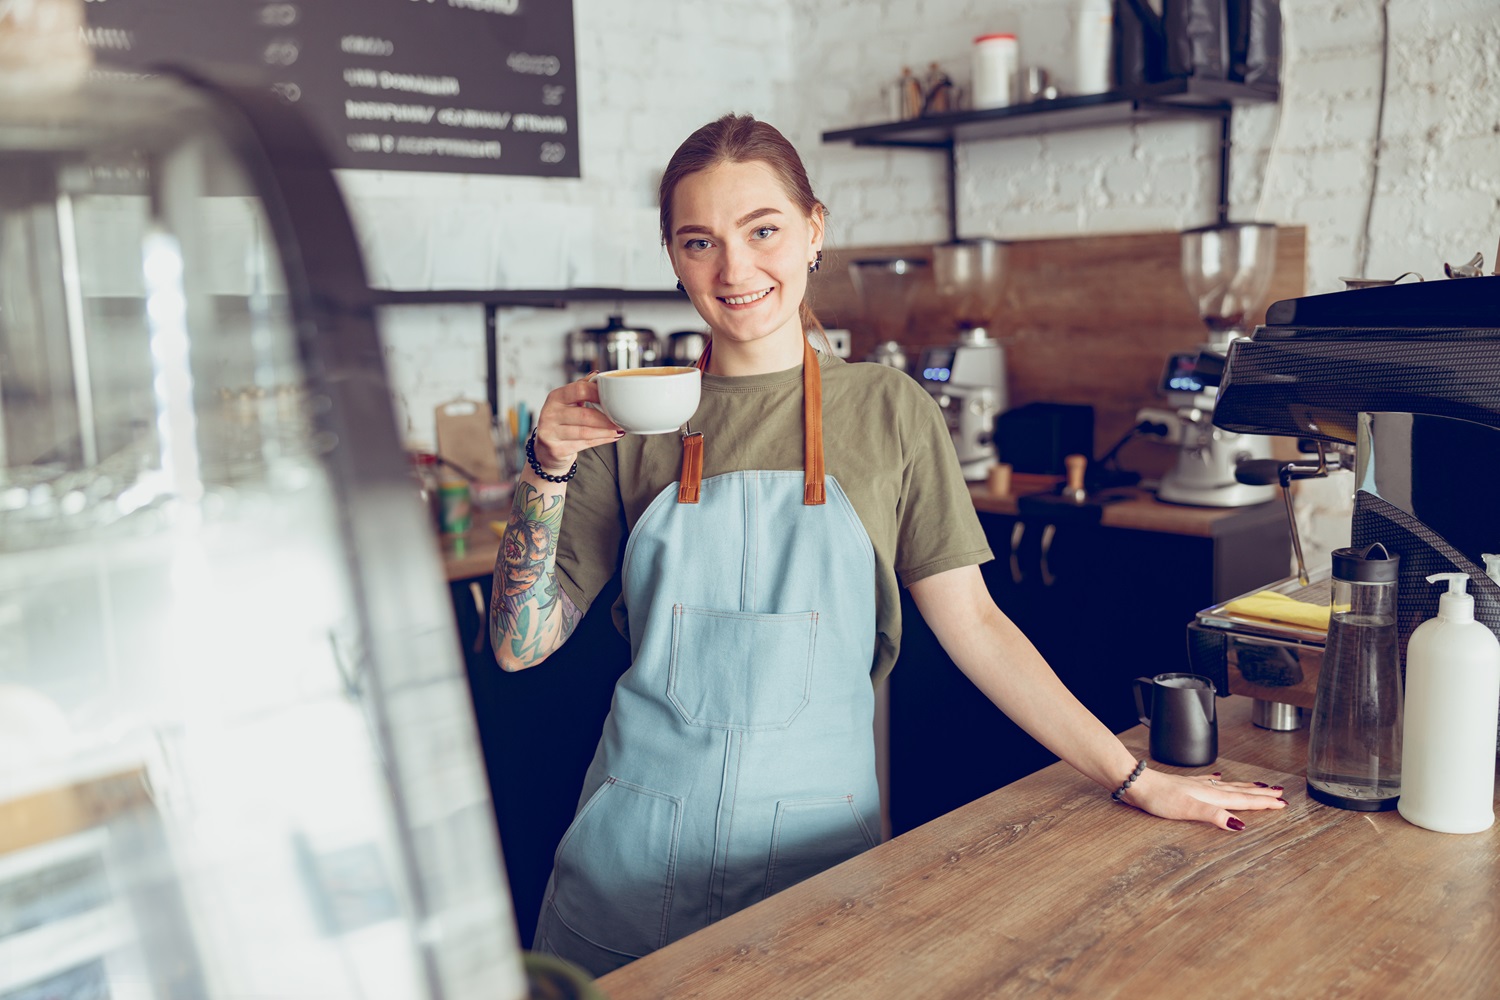 Joyful Female Barista With Cup Of Coffee Working In Cafe – ©Adobe Stock